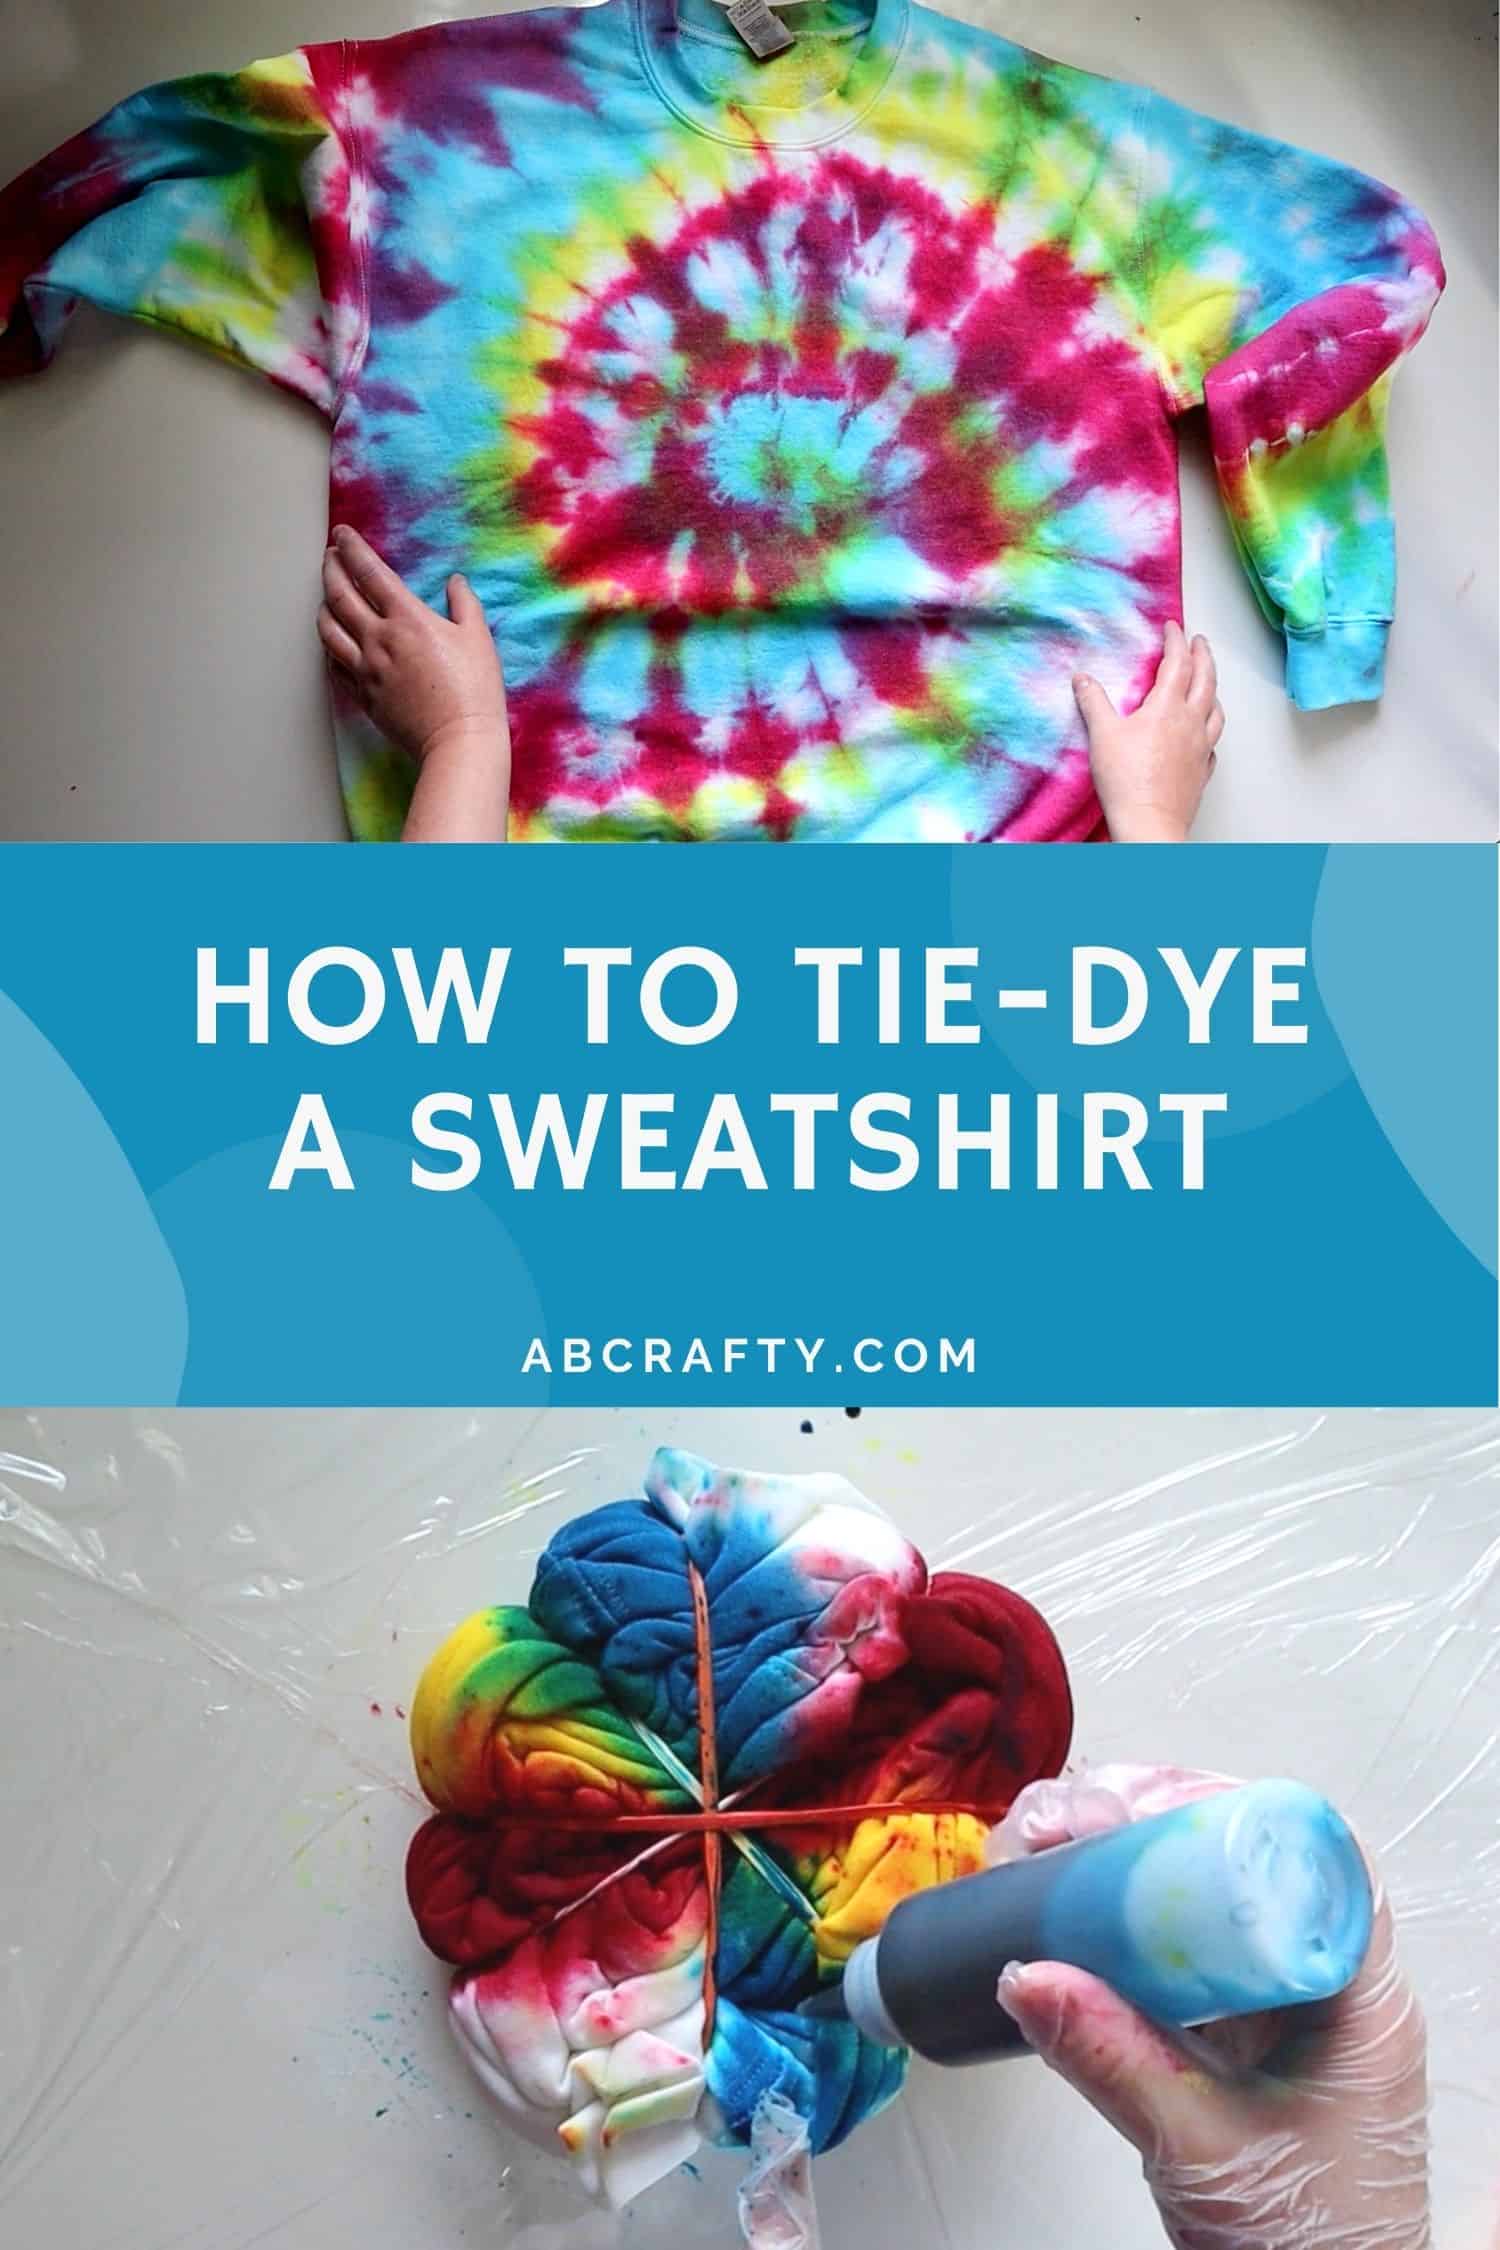 How To Create Your Own Tie Dye Sweatshirt: A Step-by-Step Guide